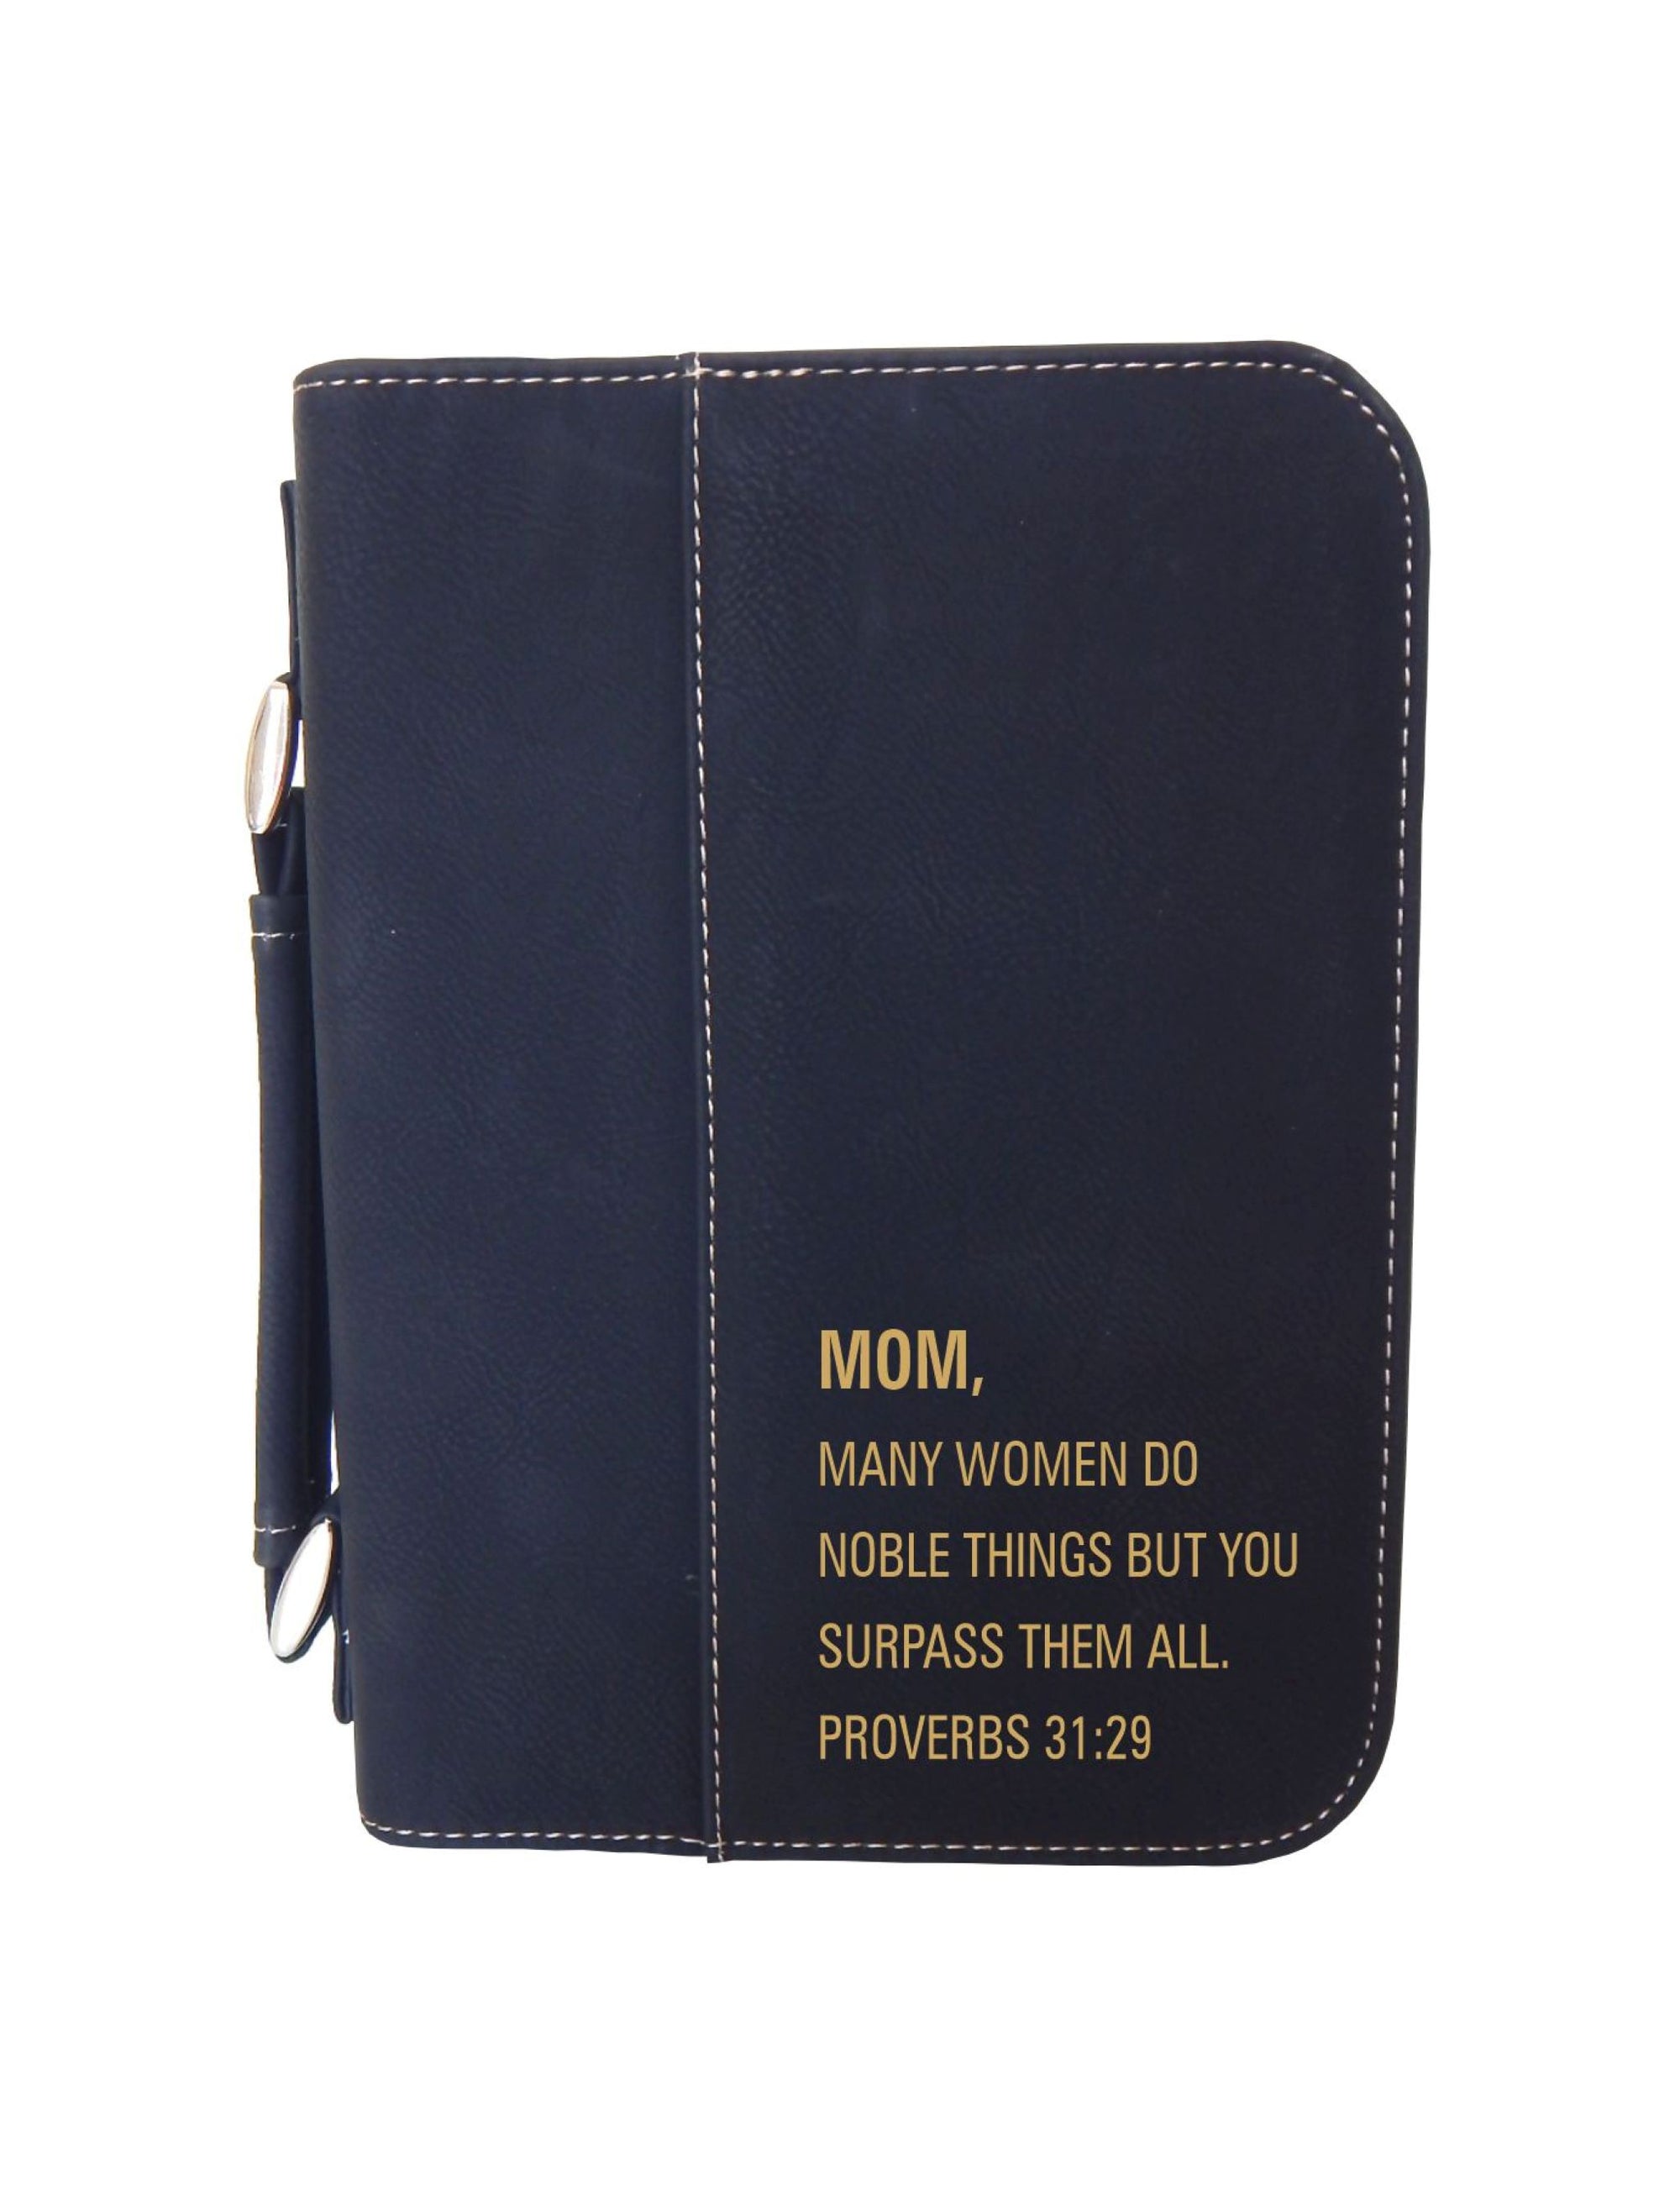 Religious Gifts for Mom | Christian Gift for Women | Leather Bible Cover BCL038